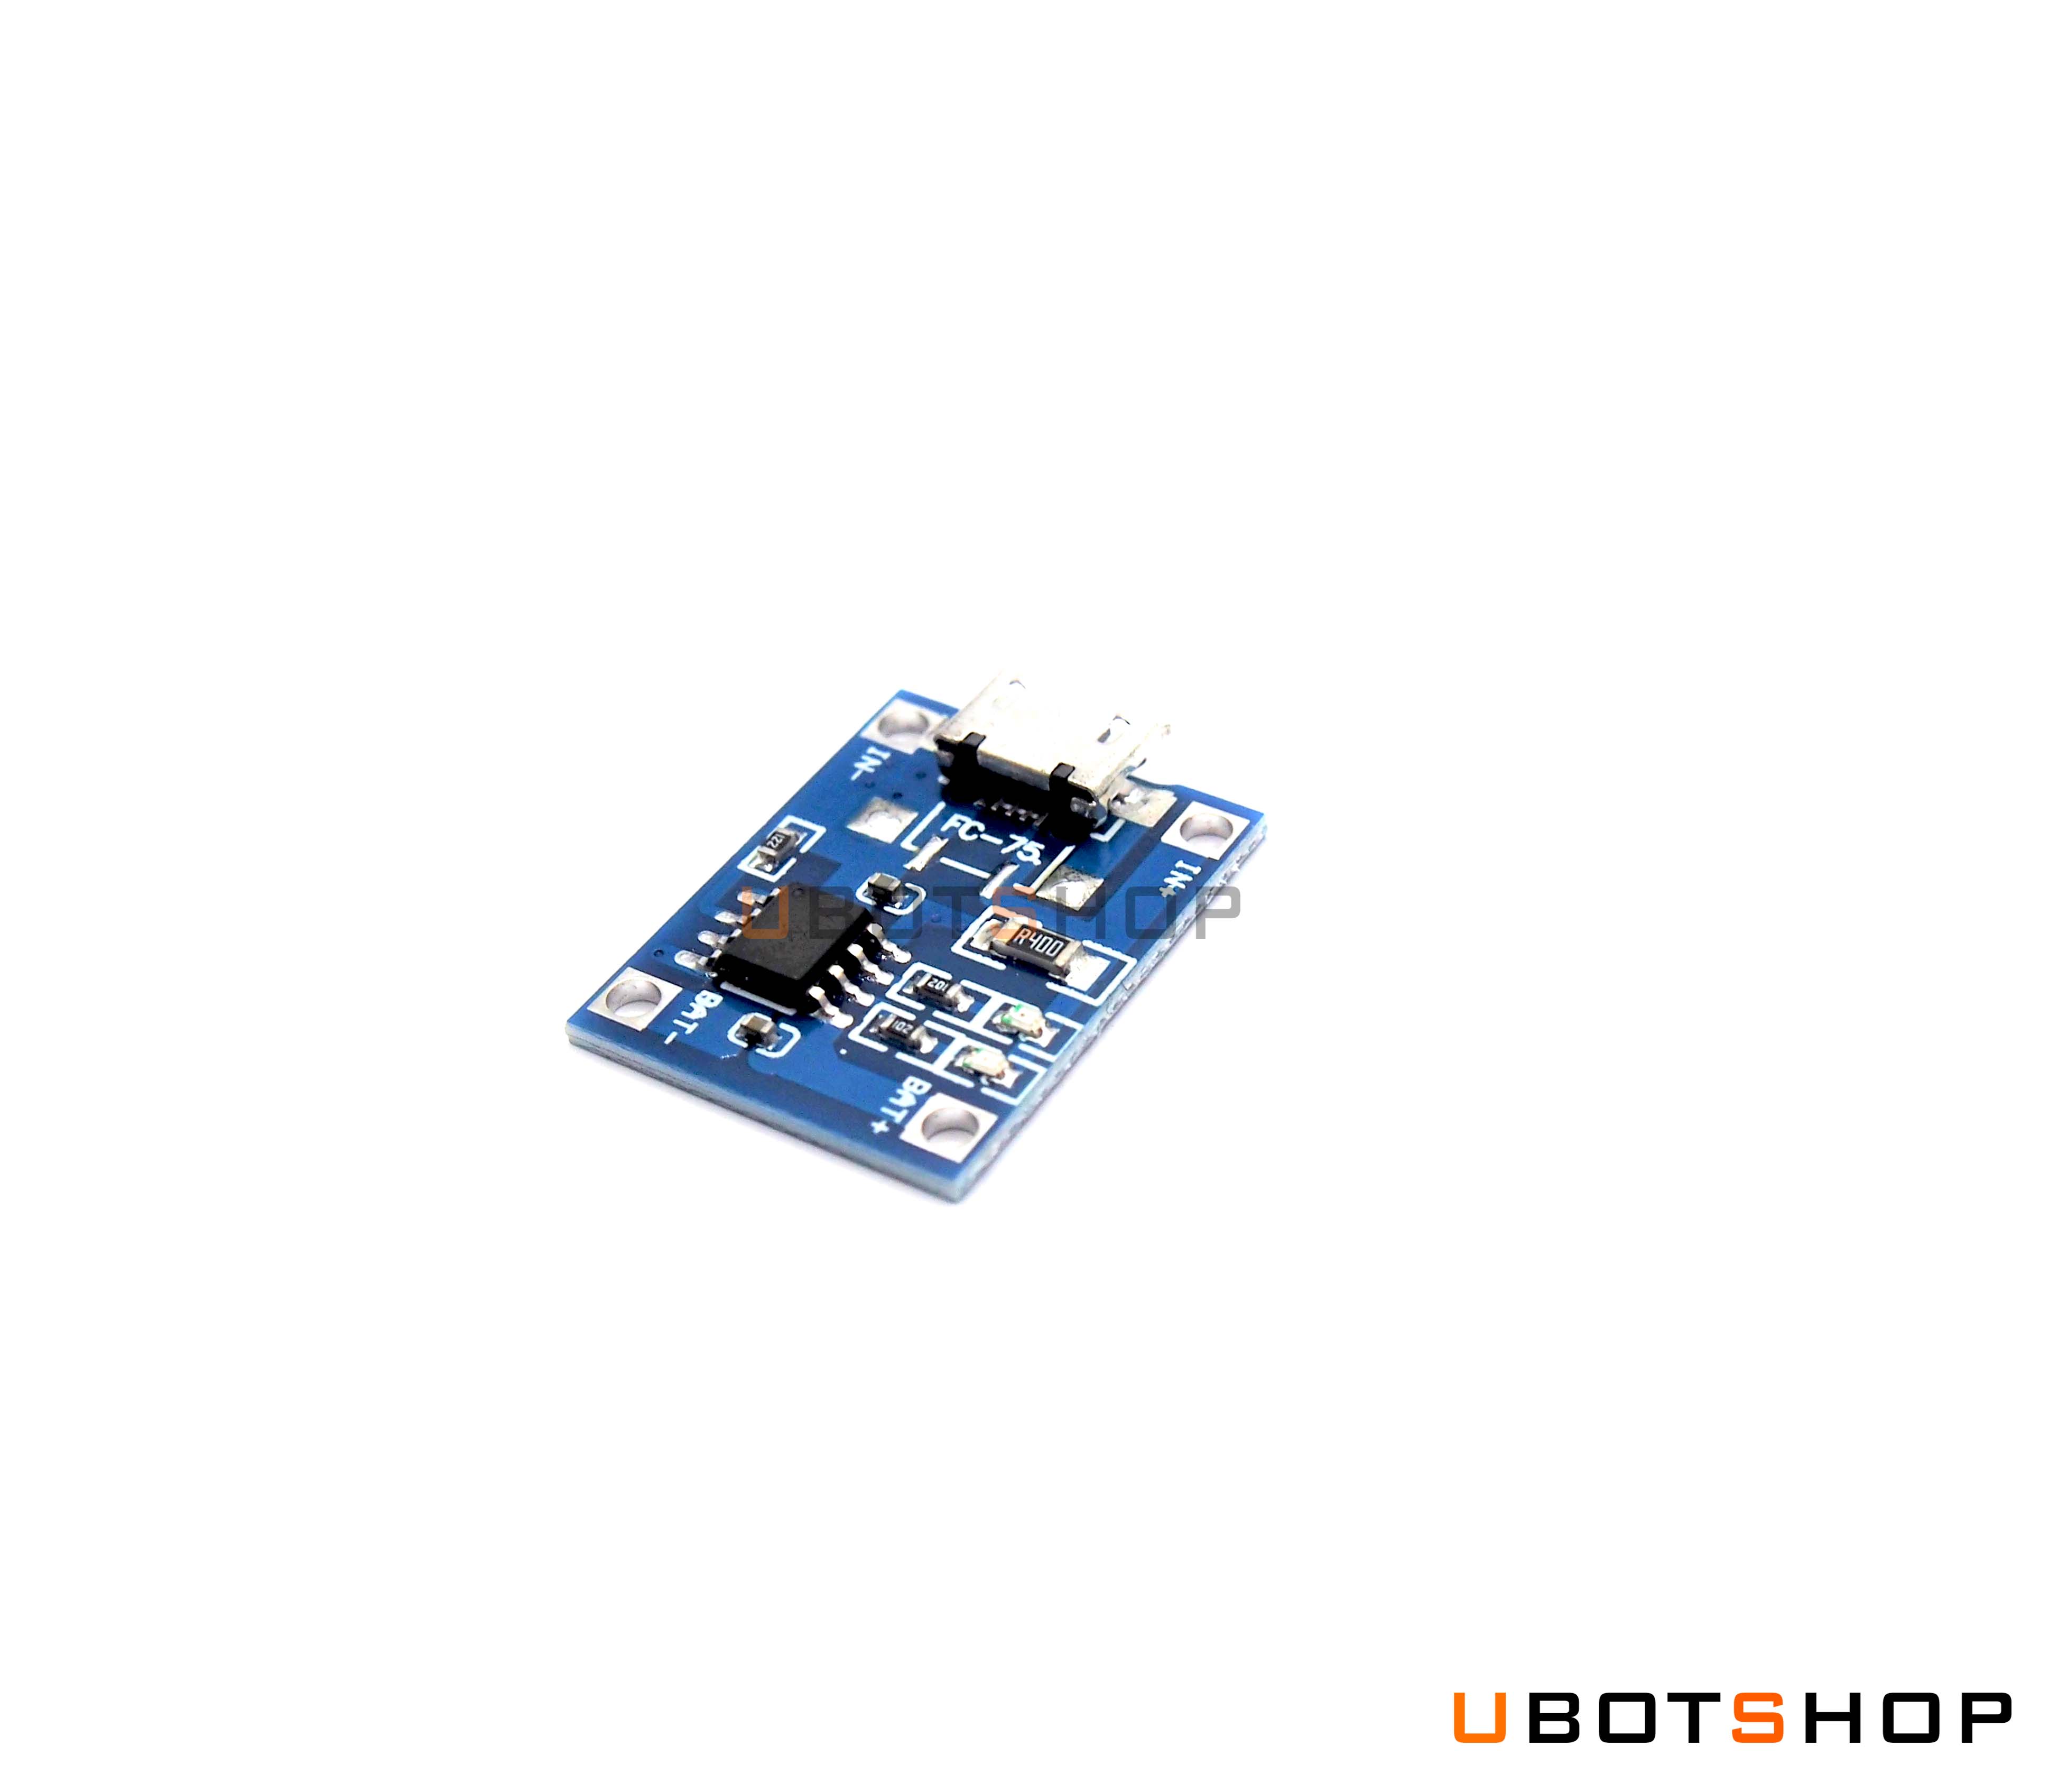 Lithium Battery Charger Module (PB0003)